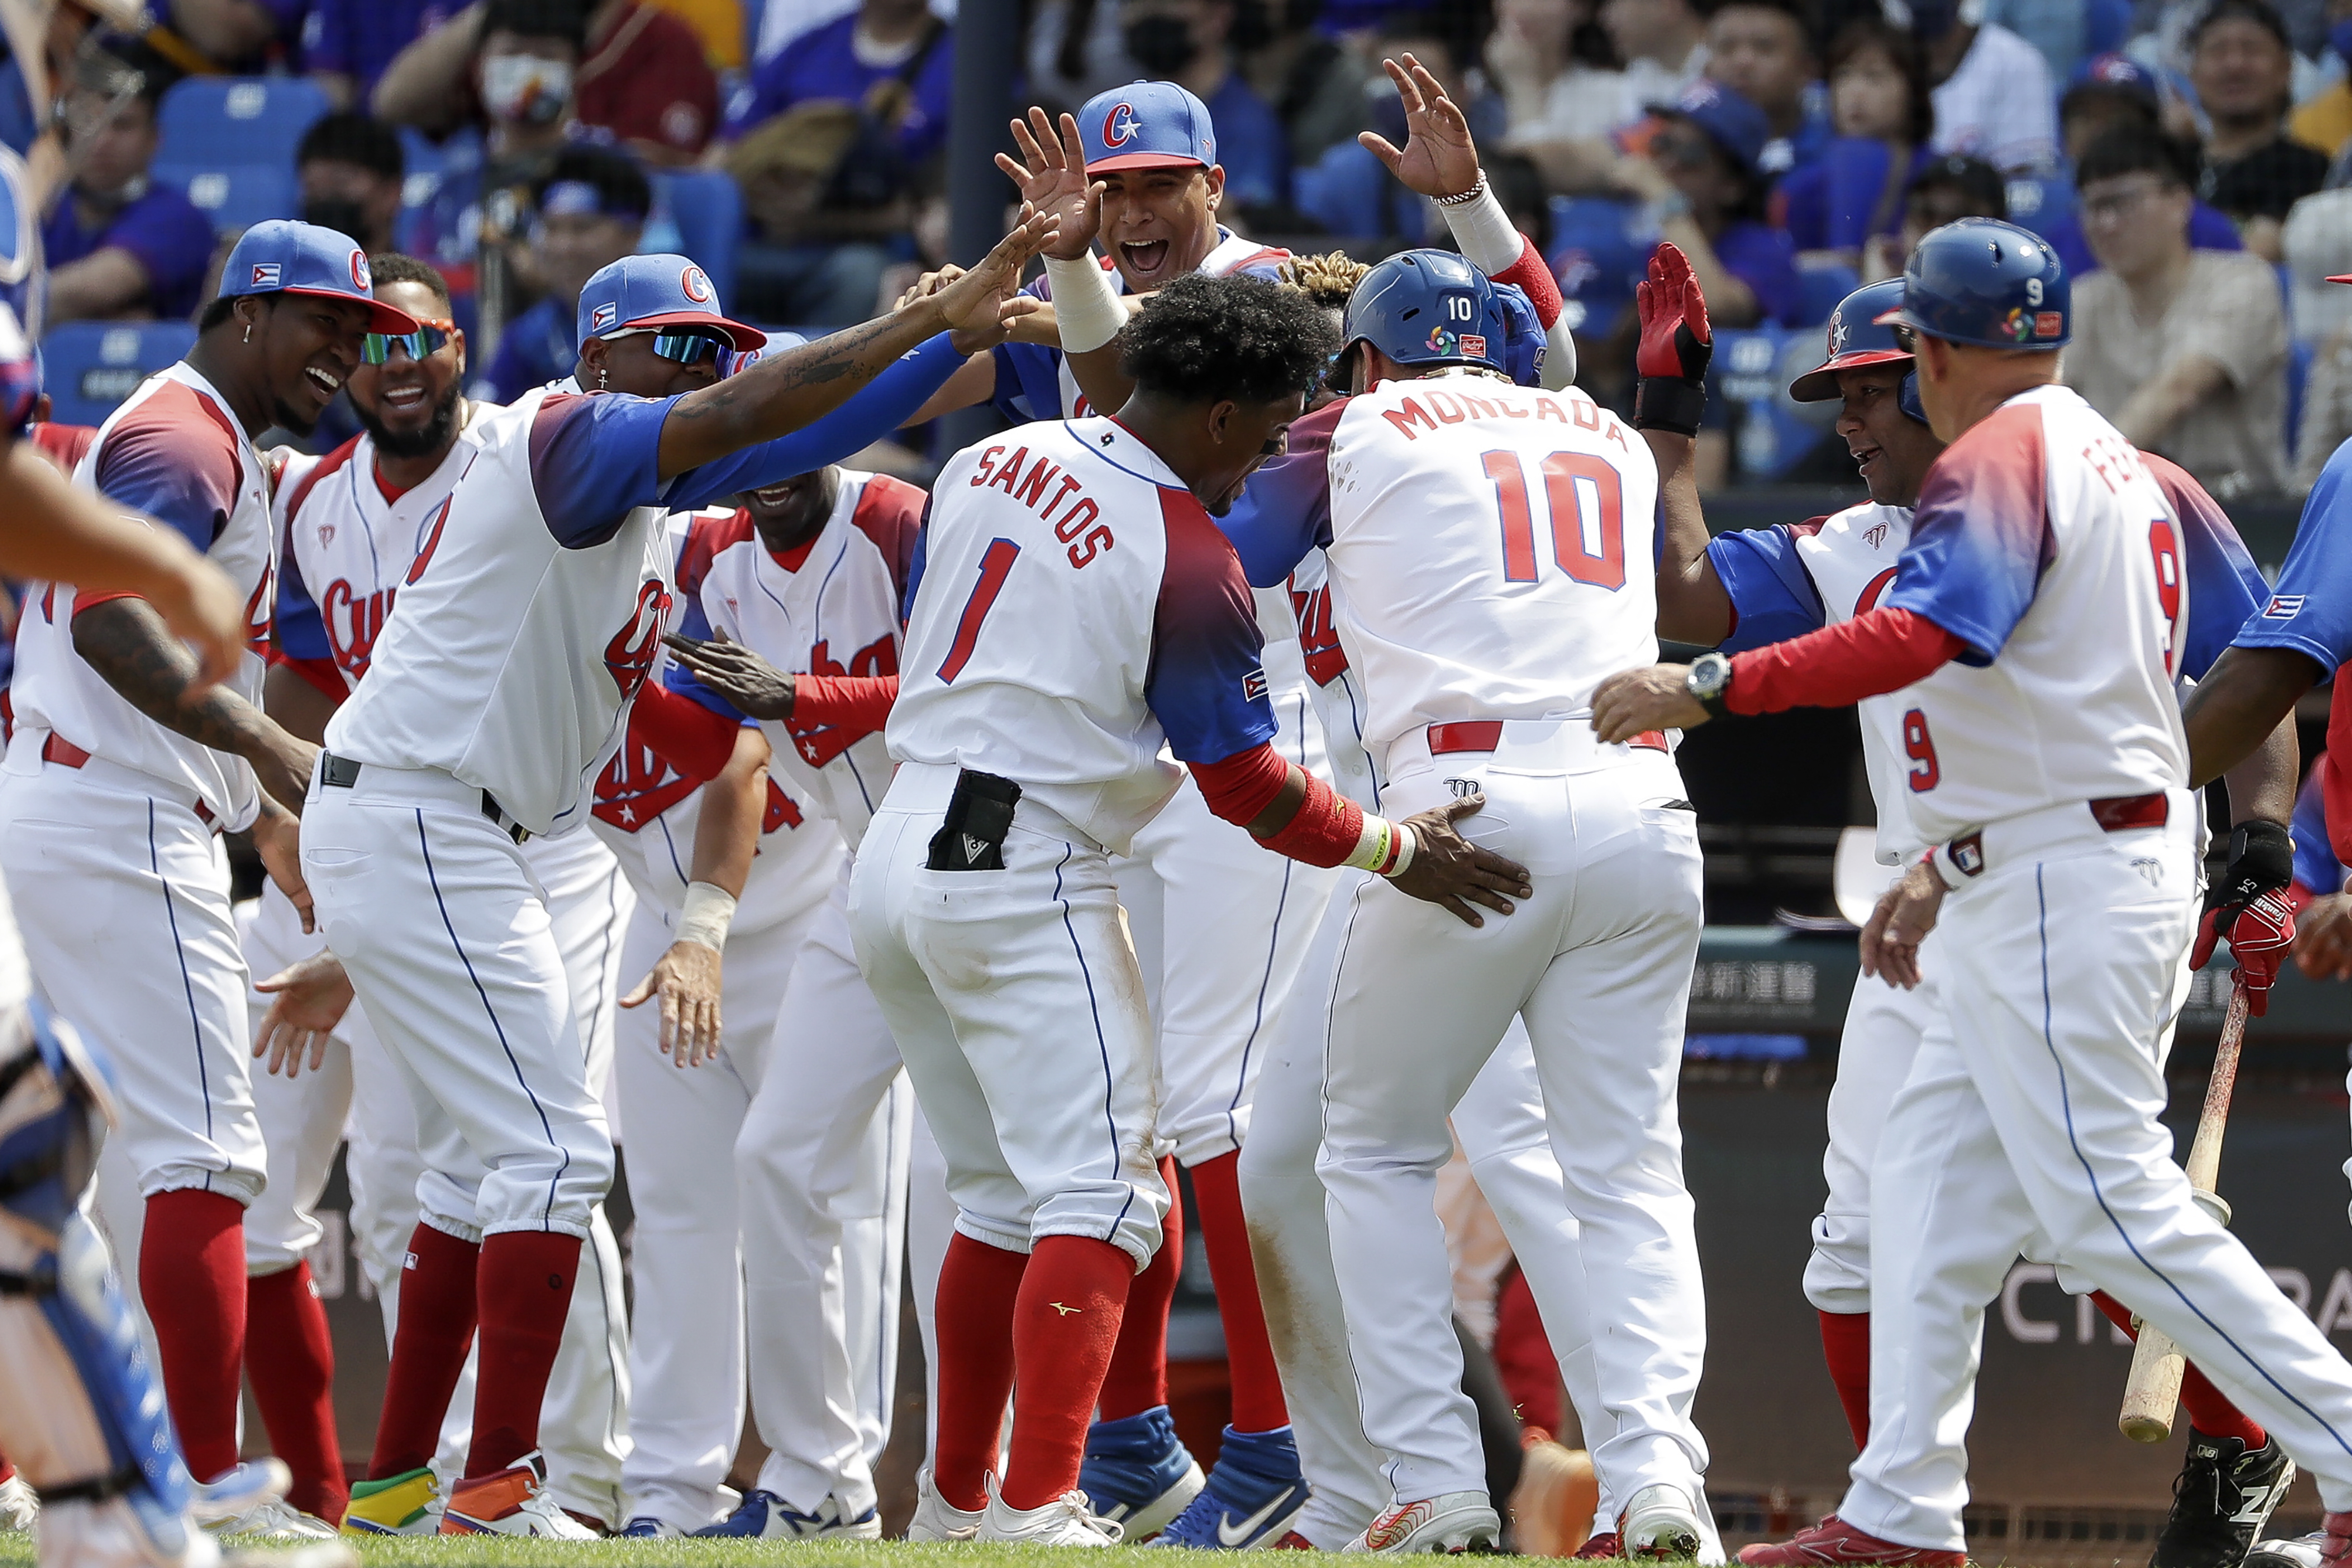 Best Cuban baseball players: All-time lineup of stars from Cuba